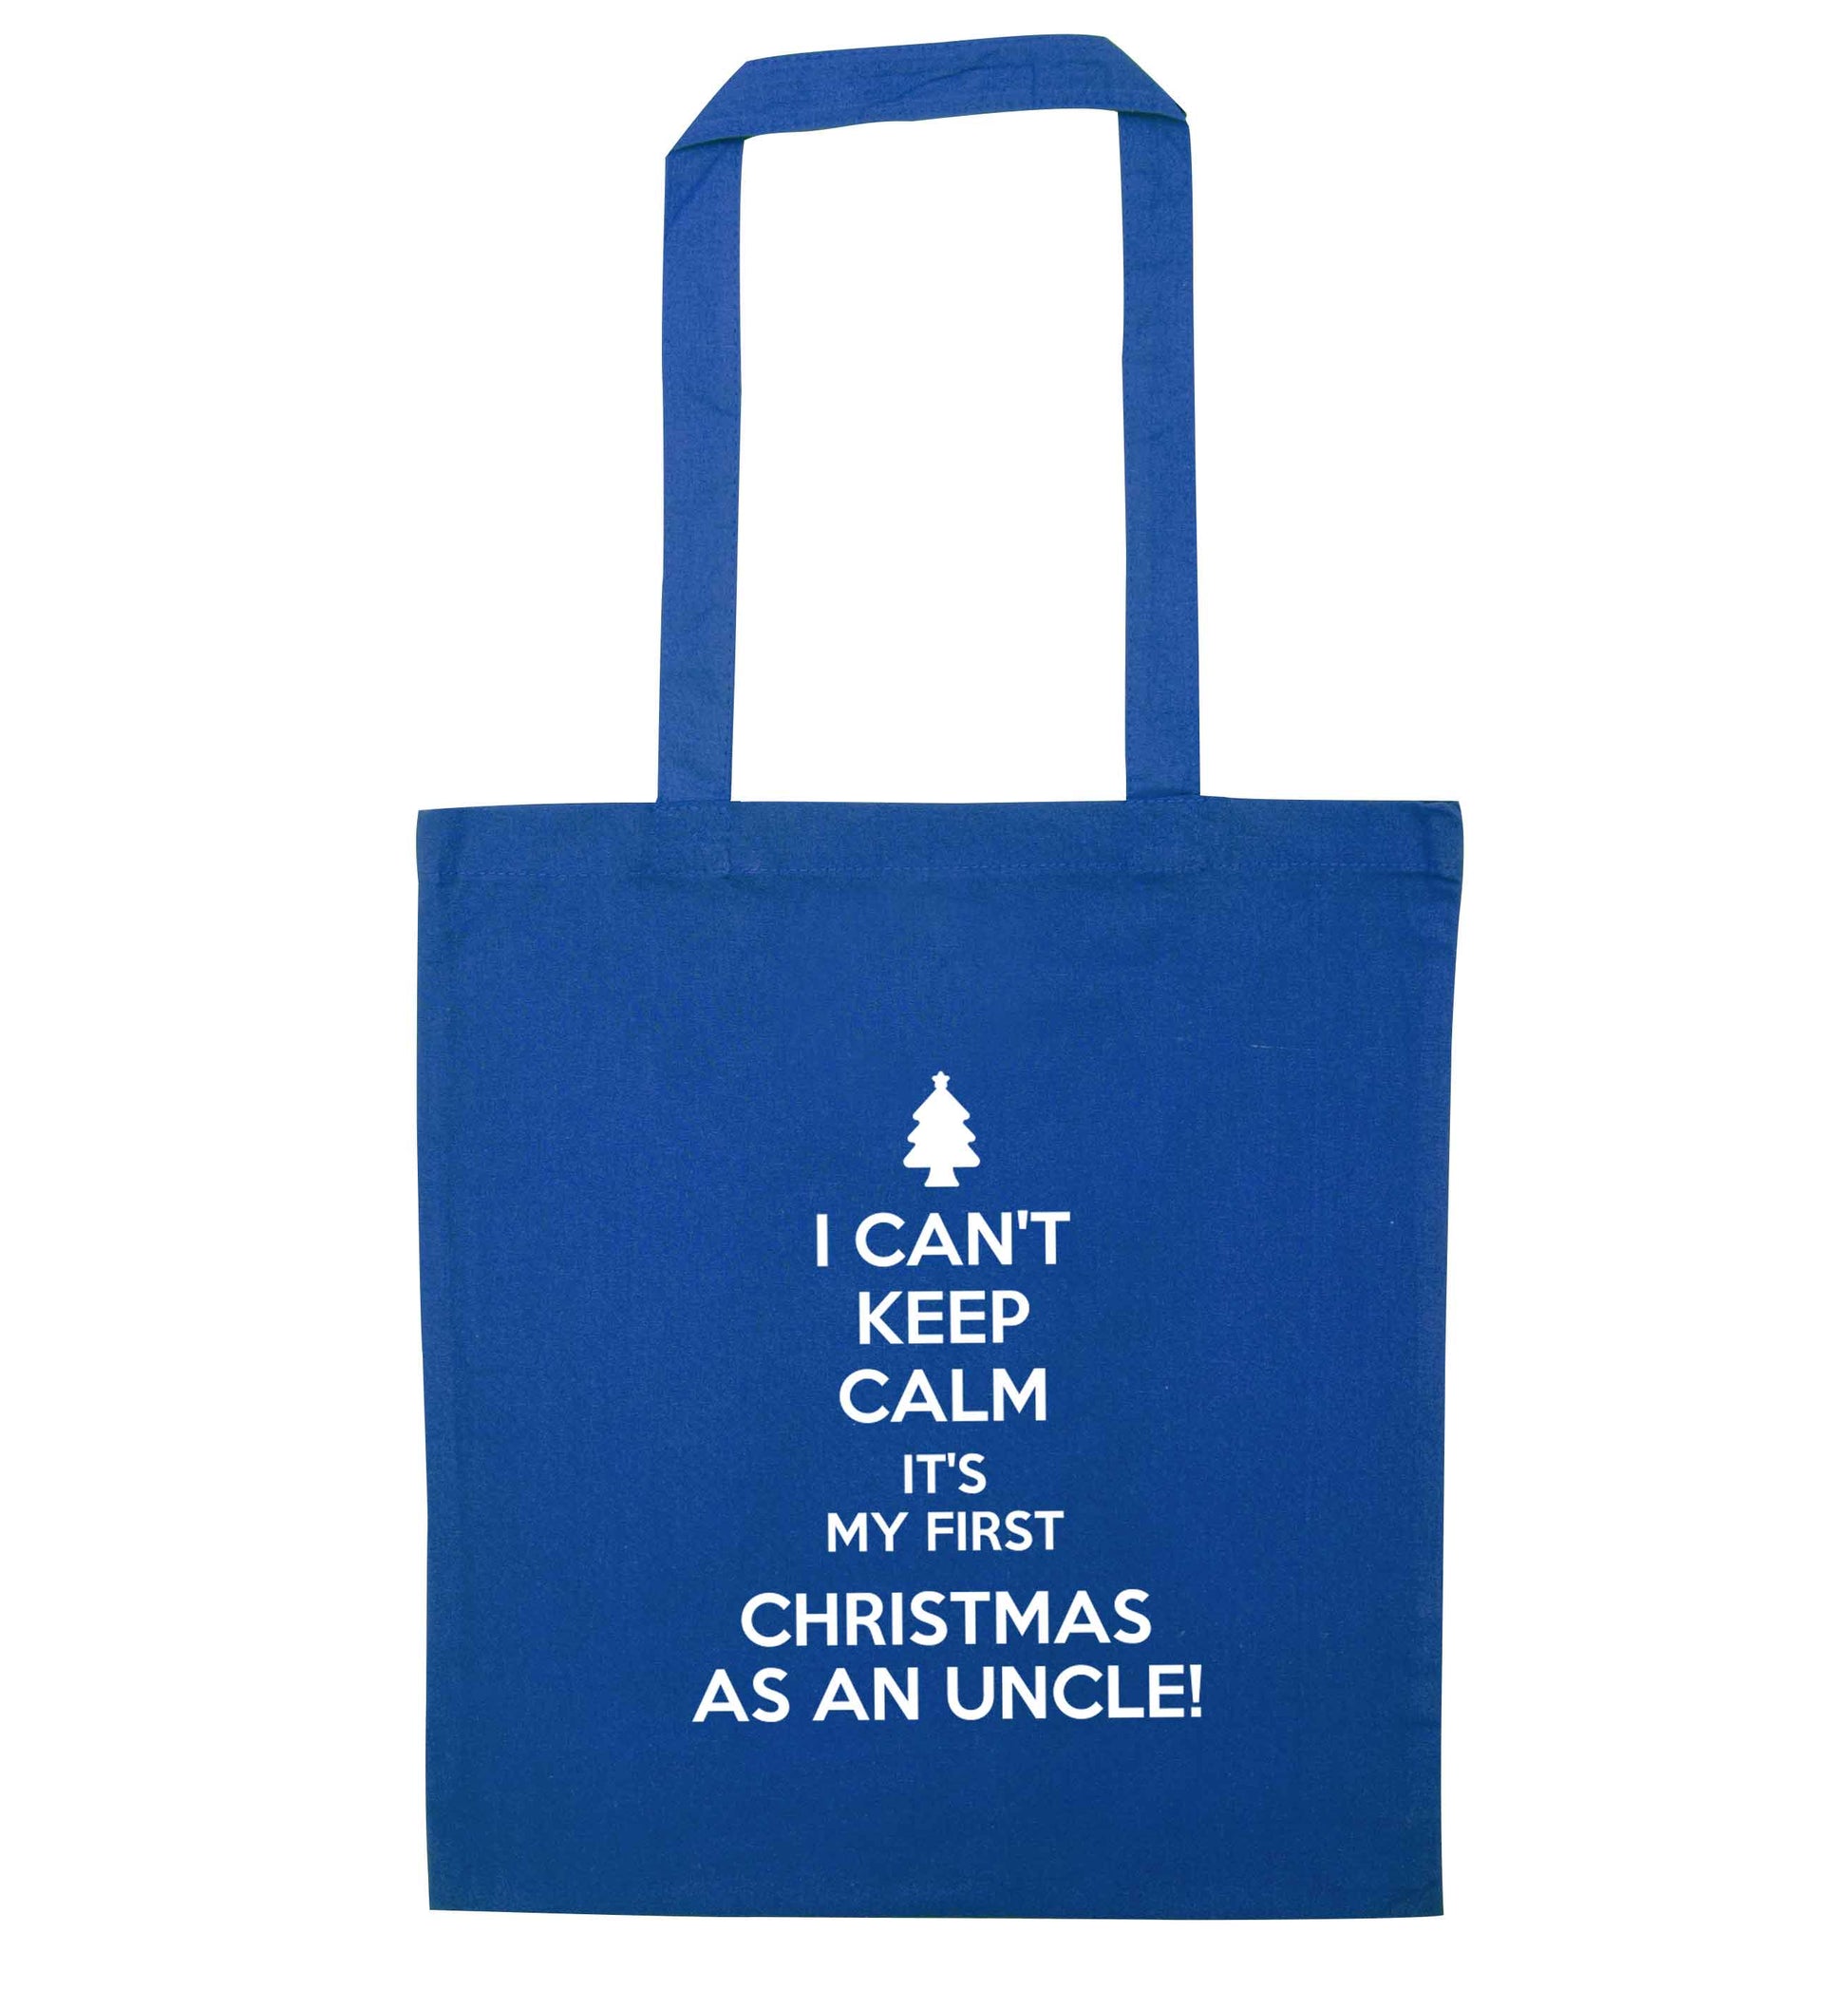 I can't keep calm it's my first Christmas as an uncle! blue tote bag